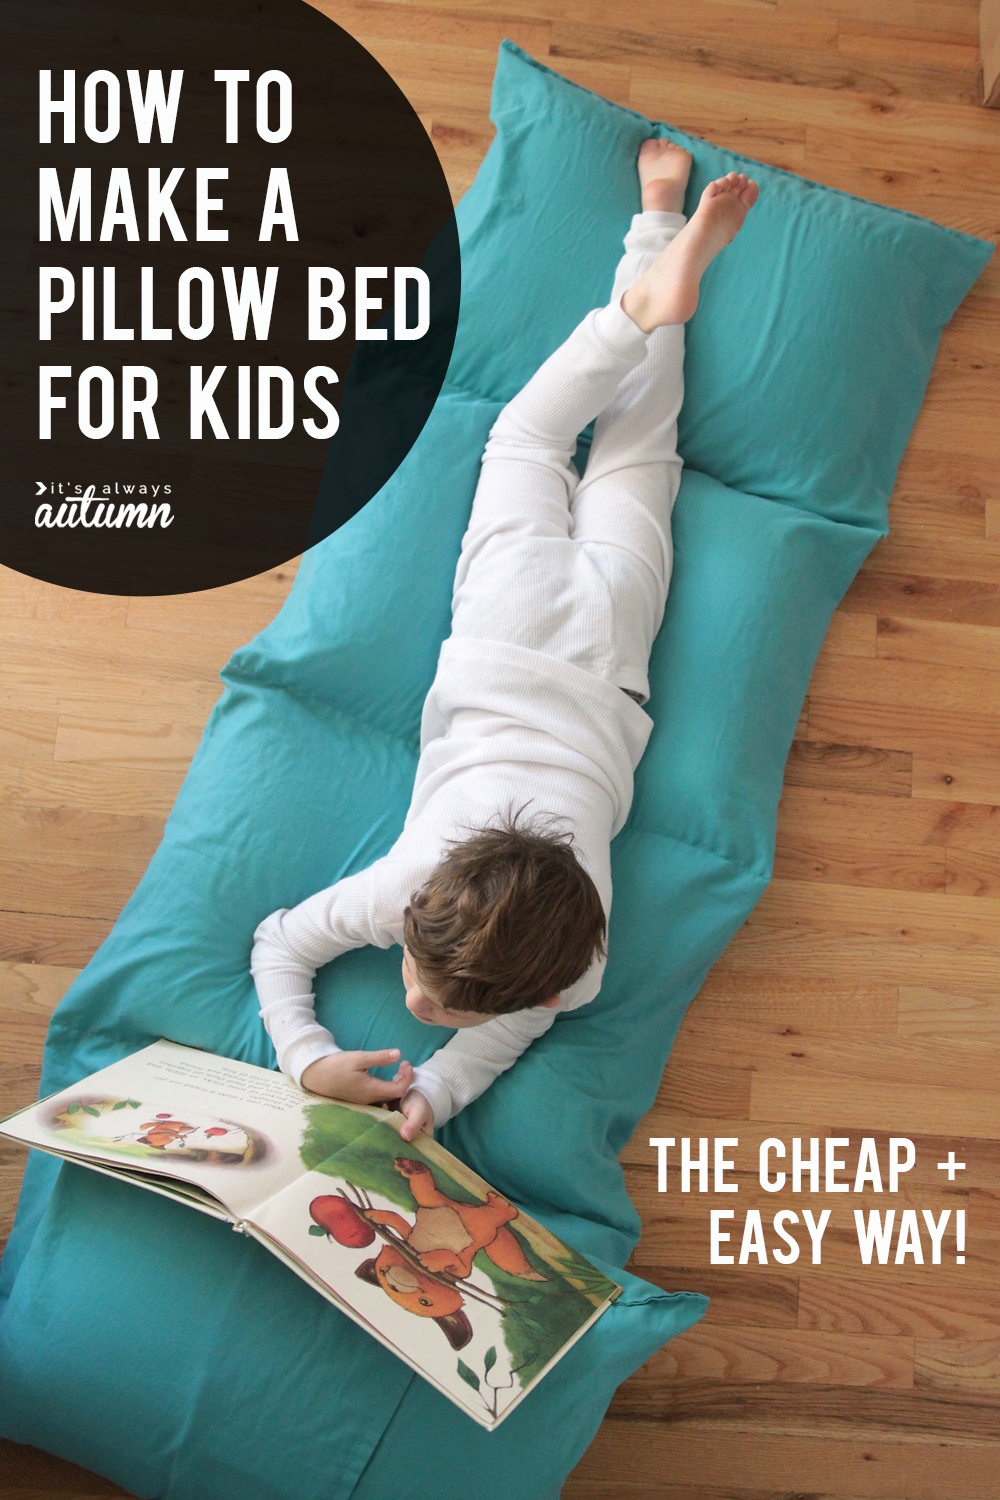 How to make a portable pillow bed for kids, the cheap + easy way! These things are great for sleepovers or lounging!